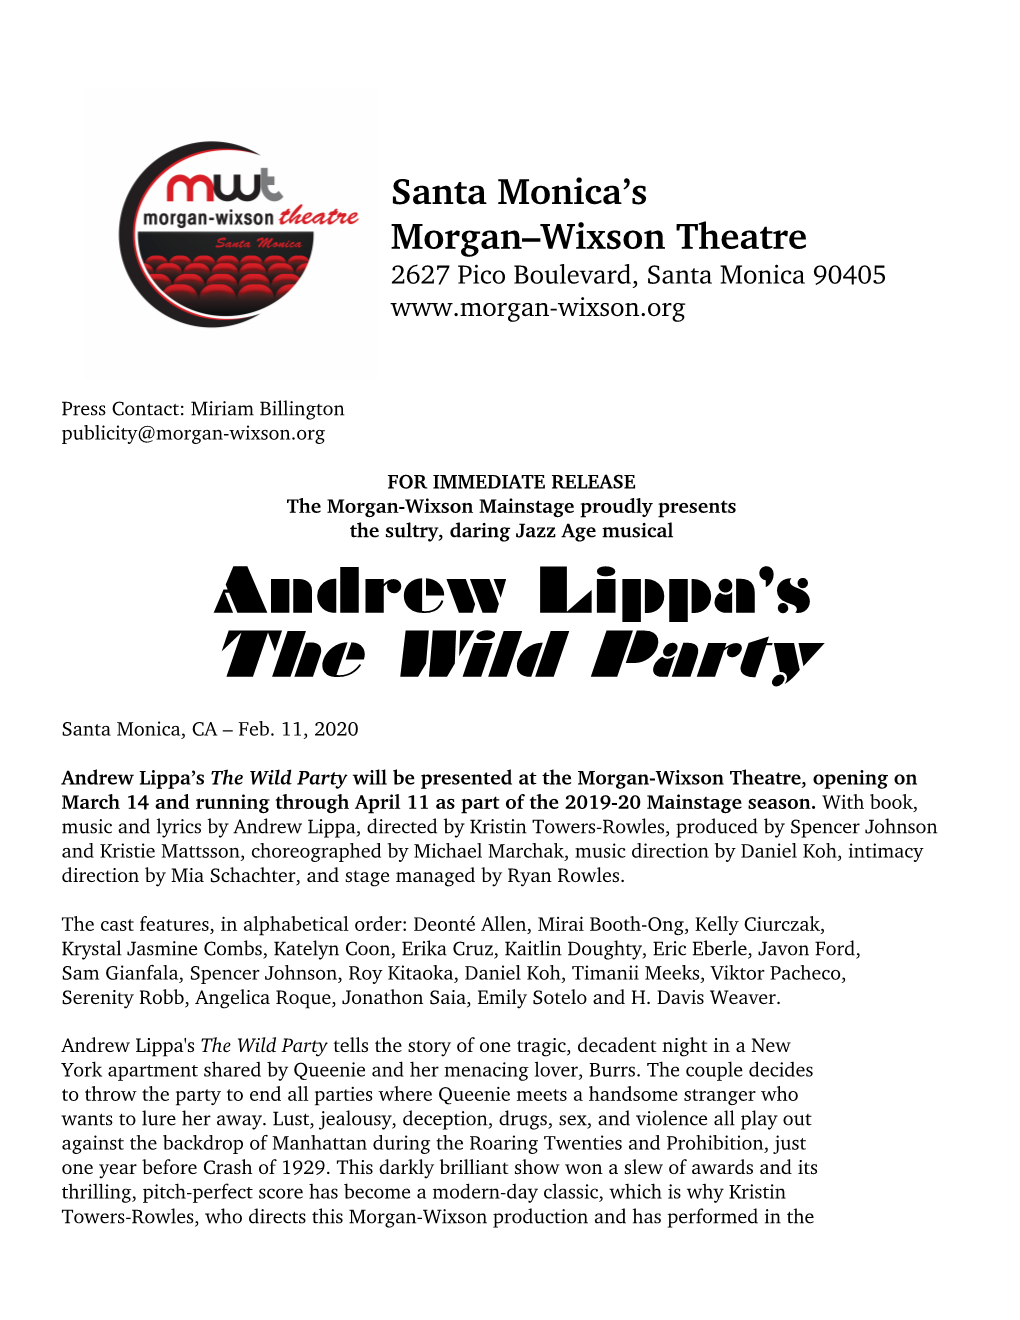 The Wild Party Press Release